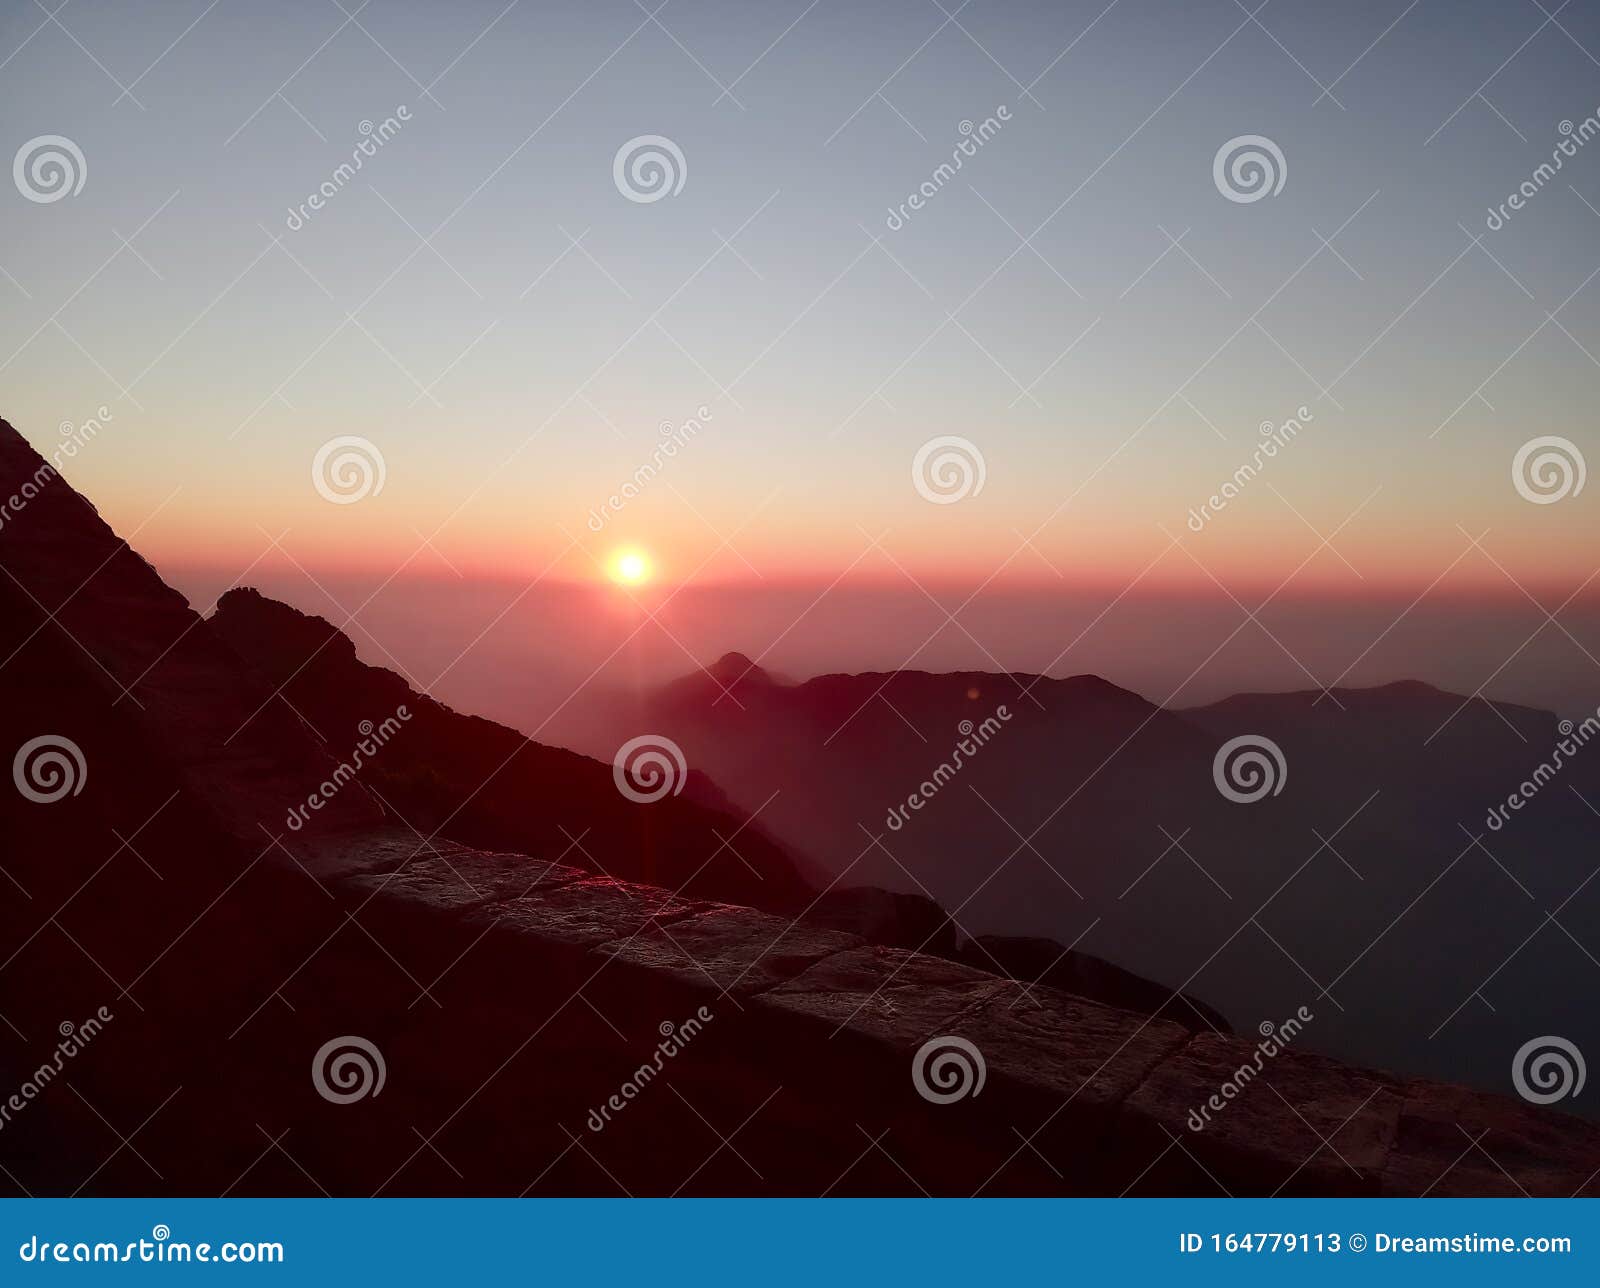 Morning San To Background Download Stock Image - Image of editing,  beautiful: 164779113